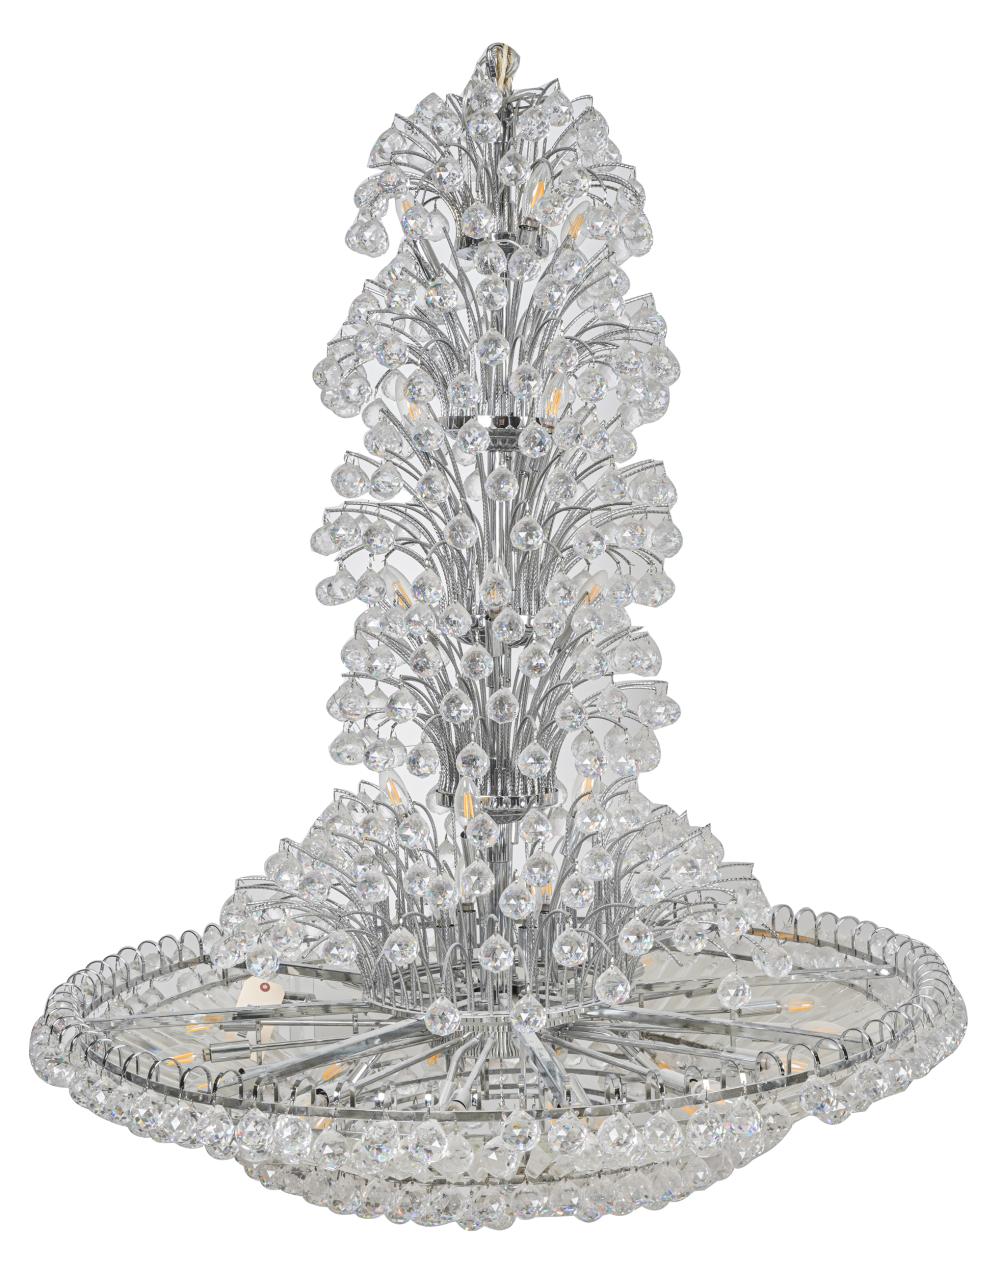 CRYSTAL CHANDELIERwith prism crystals